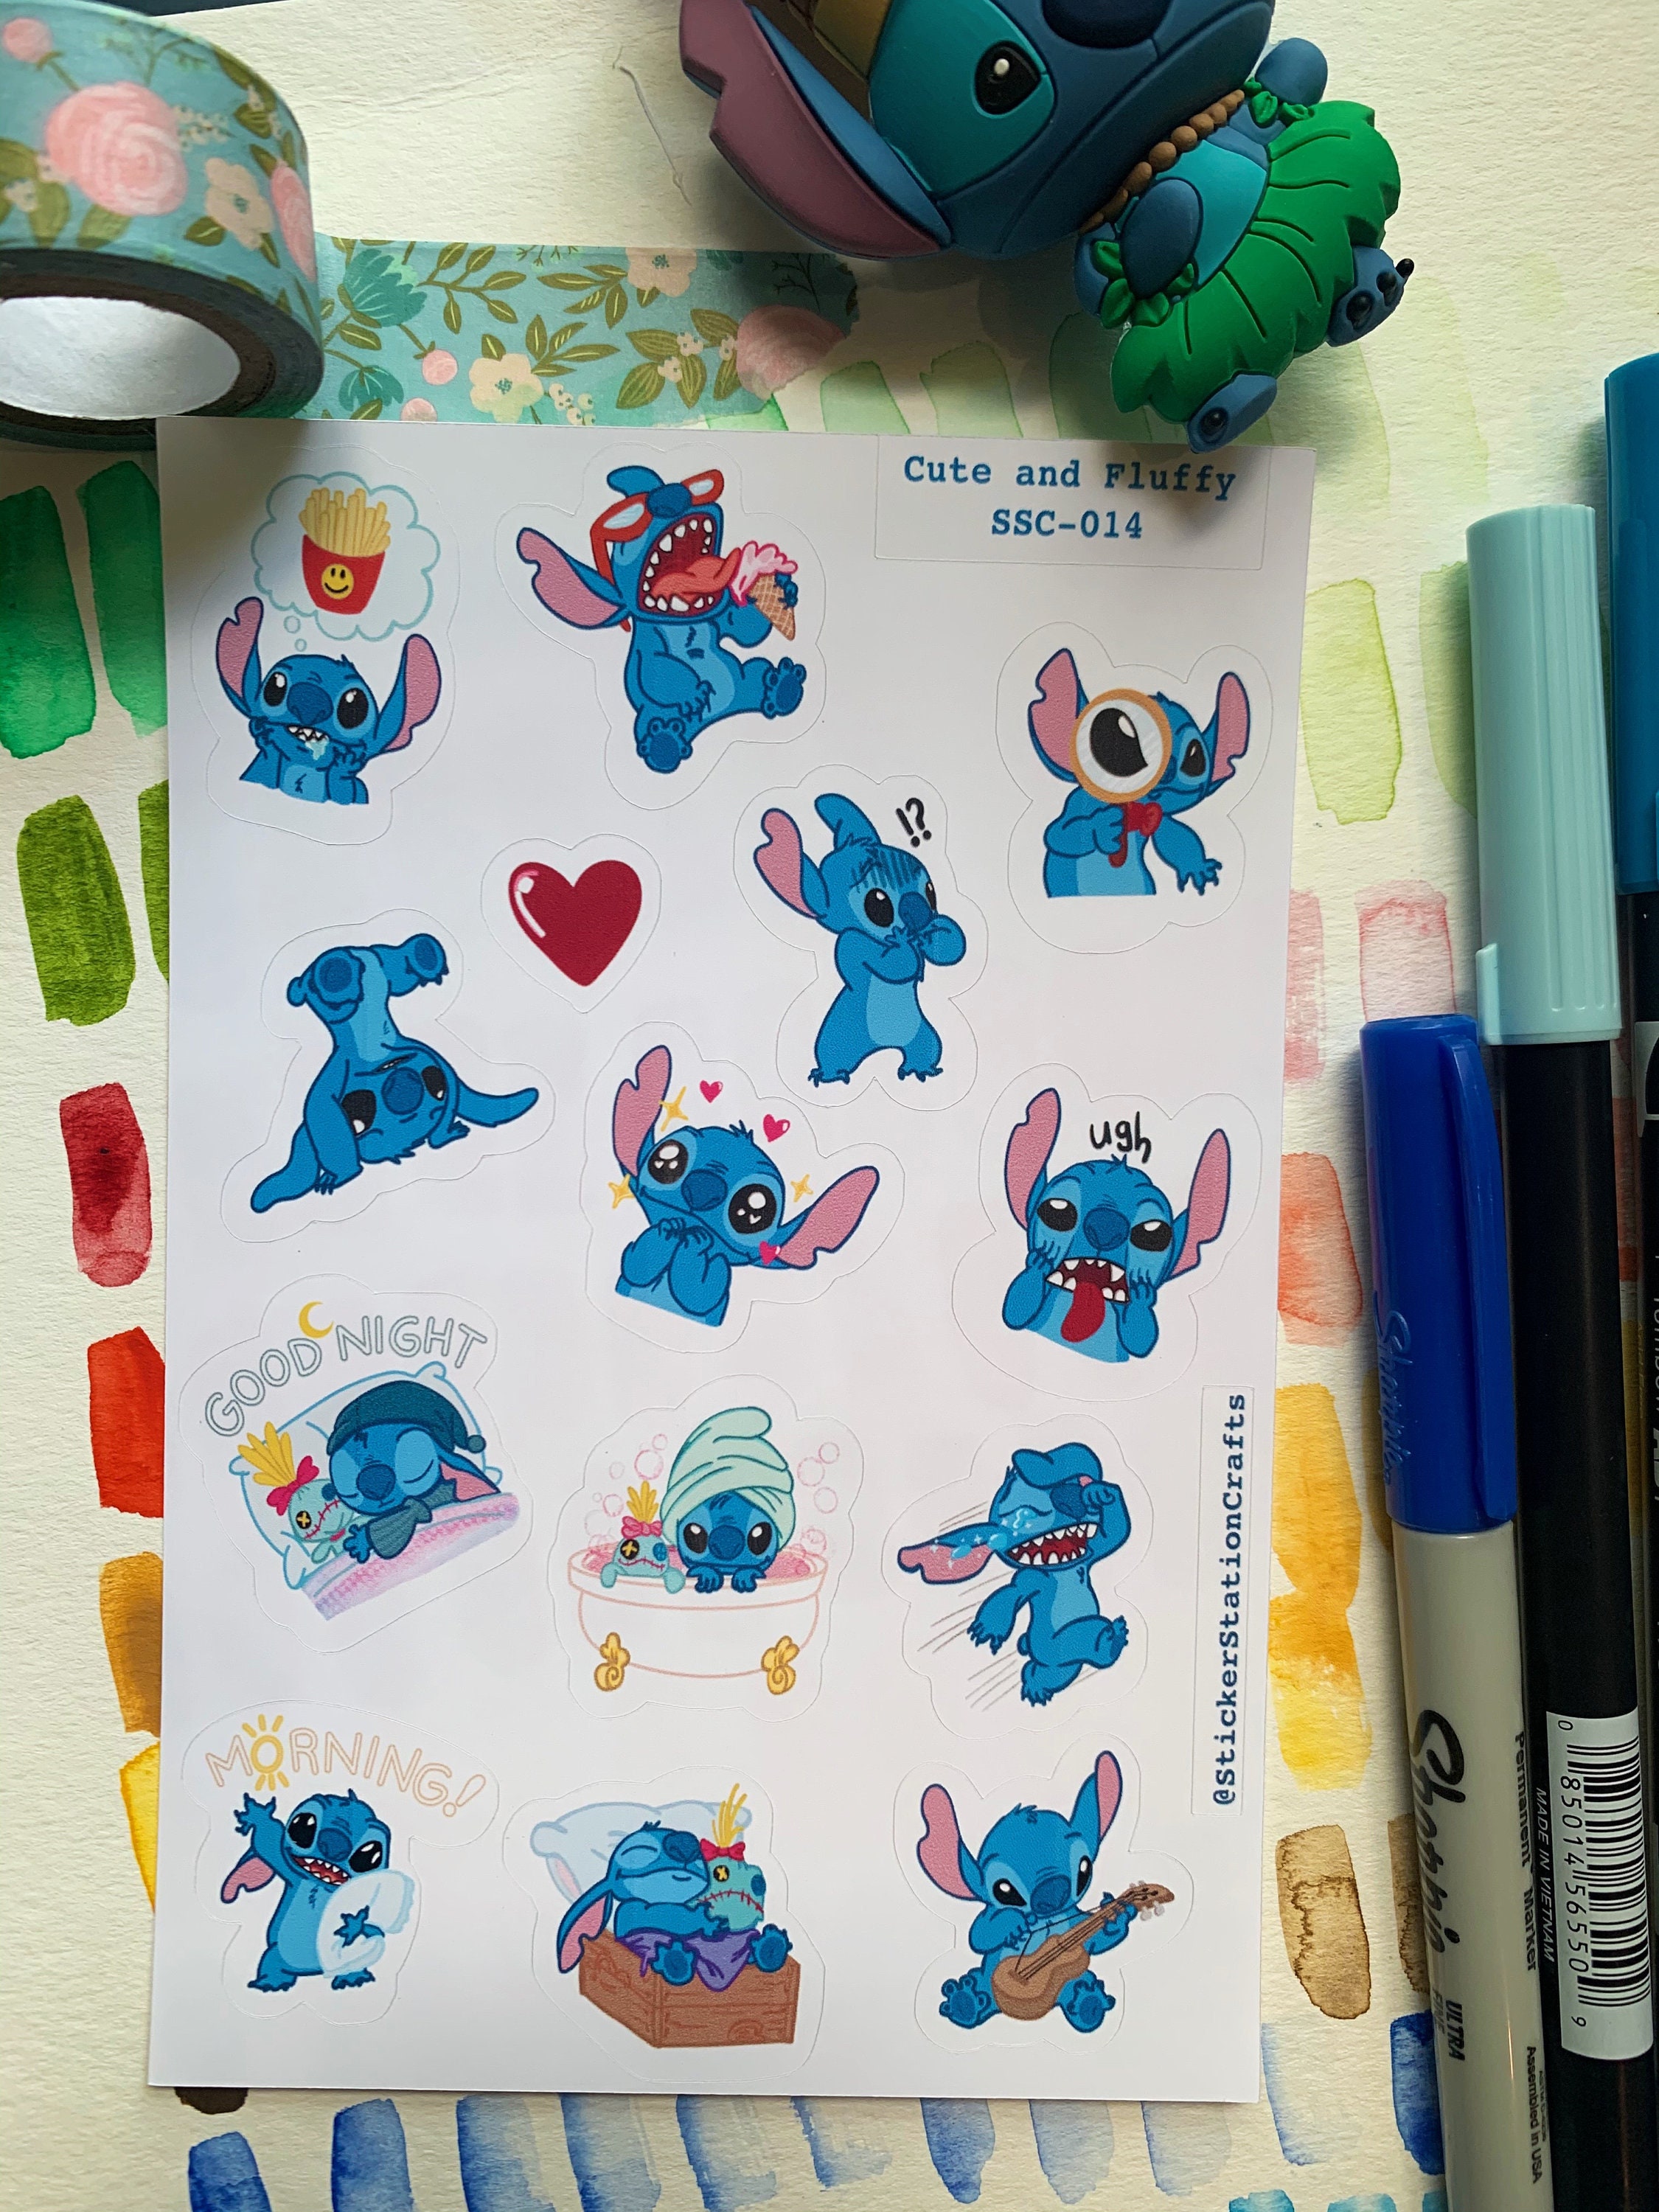 Cute and Fluffy GLOSSY Sticker Sheet Bujo Stickers | Etsy